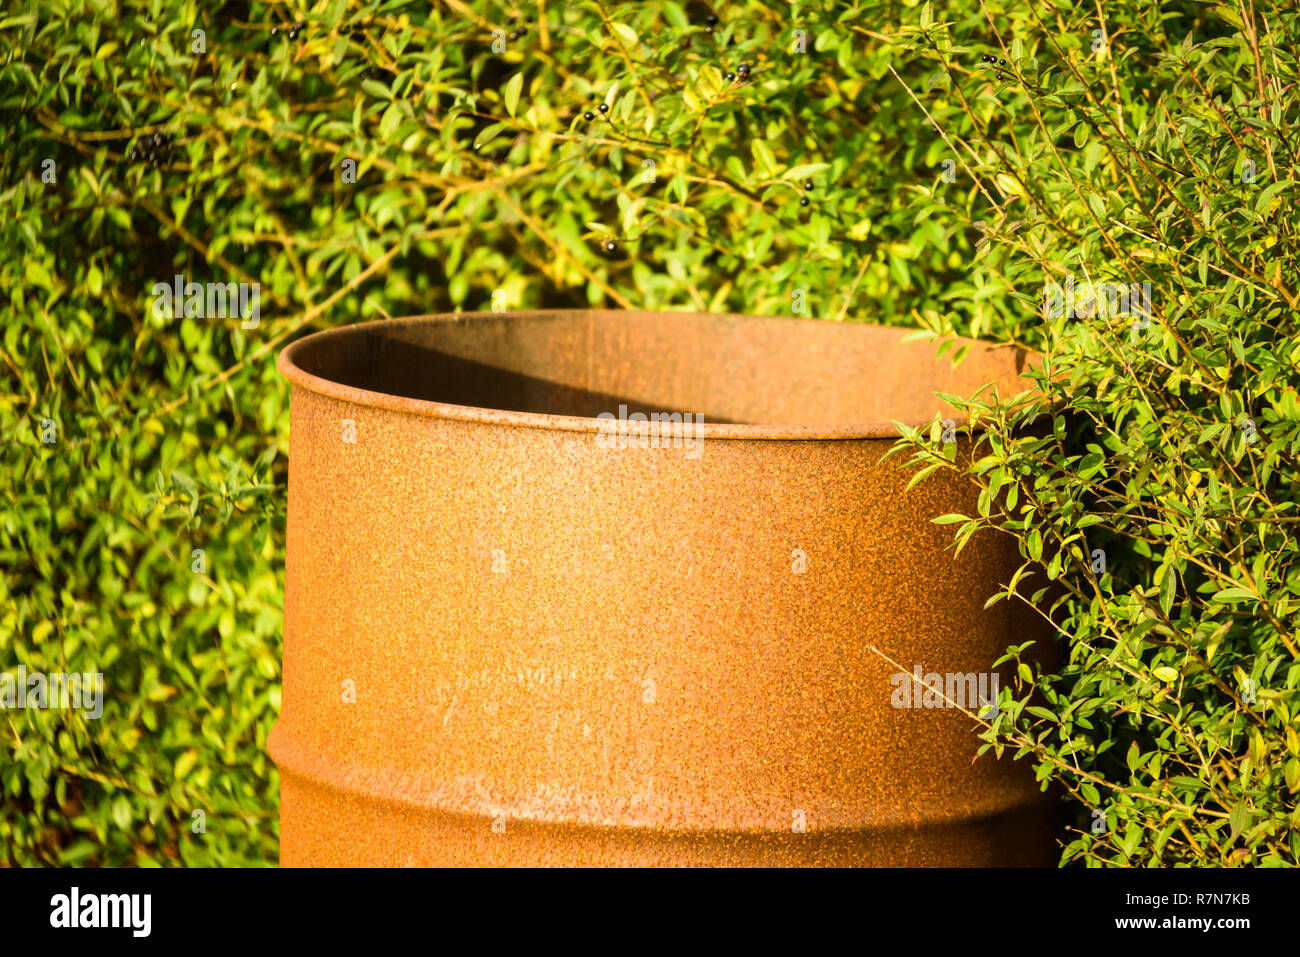 Rusty old steel barrel against green shrubbery. This specific barrel is occasionally used as a fireplace in a garden to burn twigs and other wooden de Stock Photo